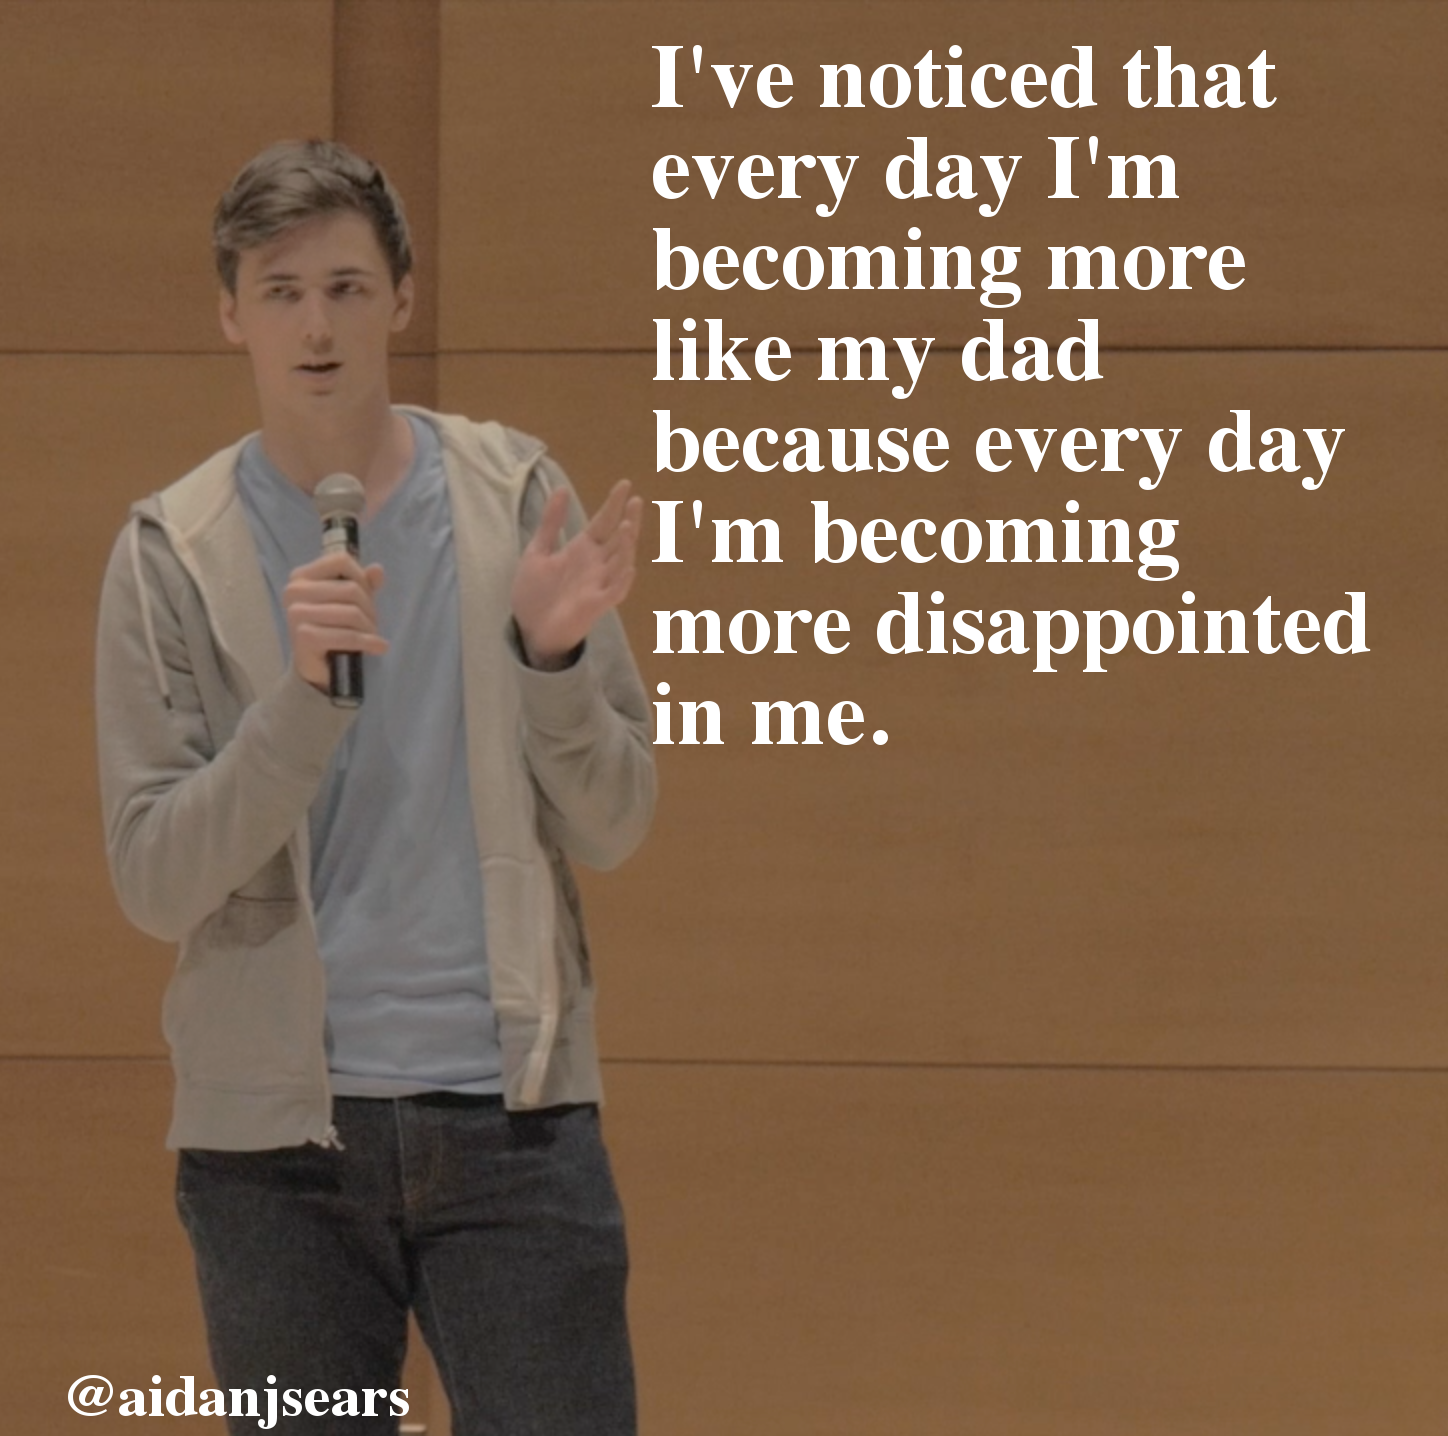 stand up family joke - I've noticed that every day I'm becoming more my dad because every day I'm becoming more disappointed in me.